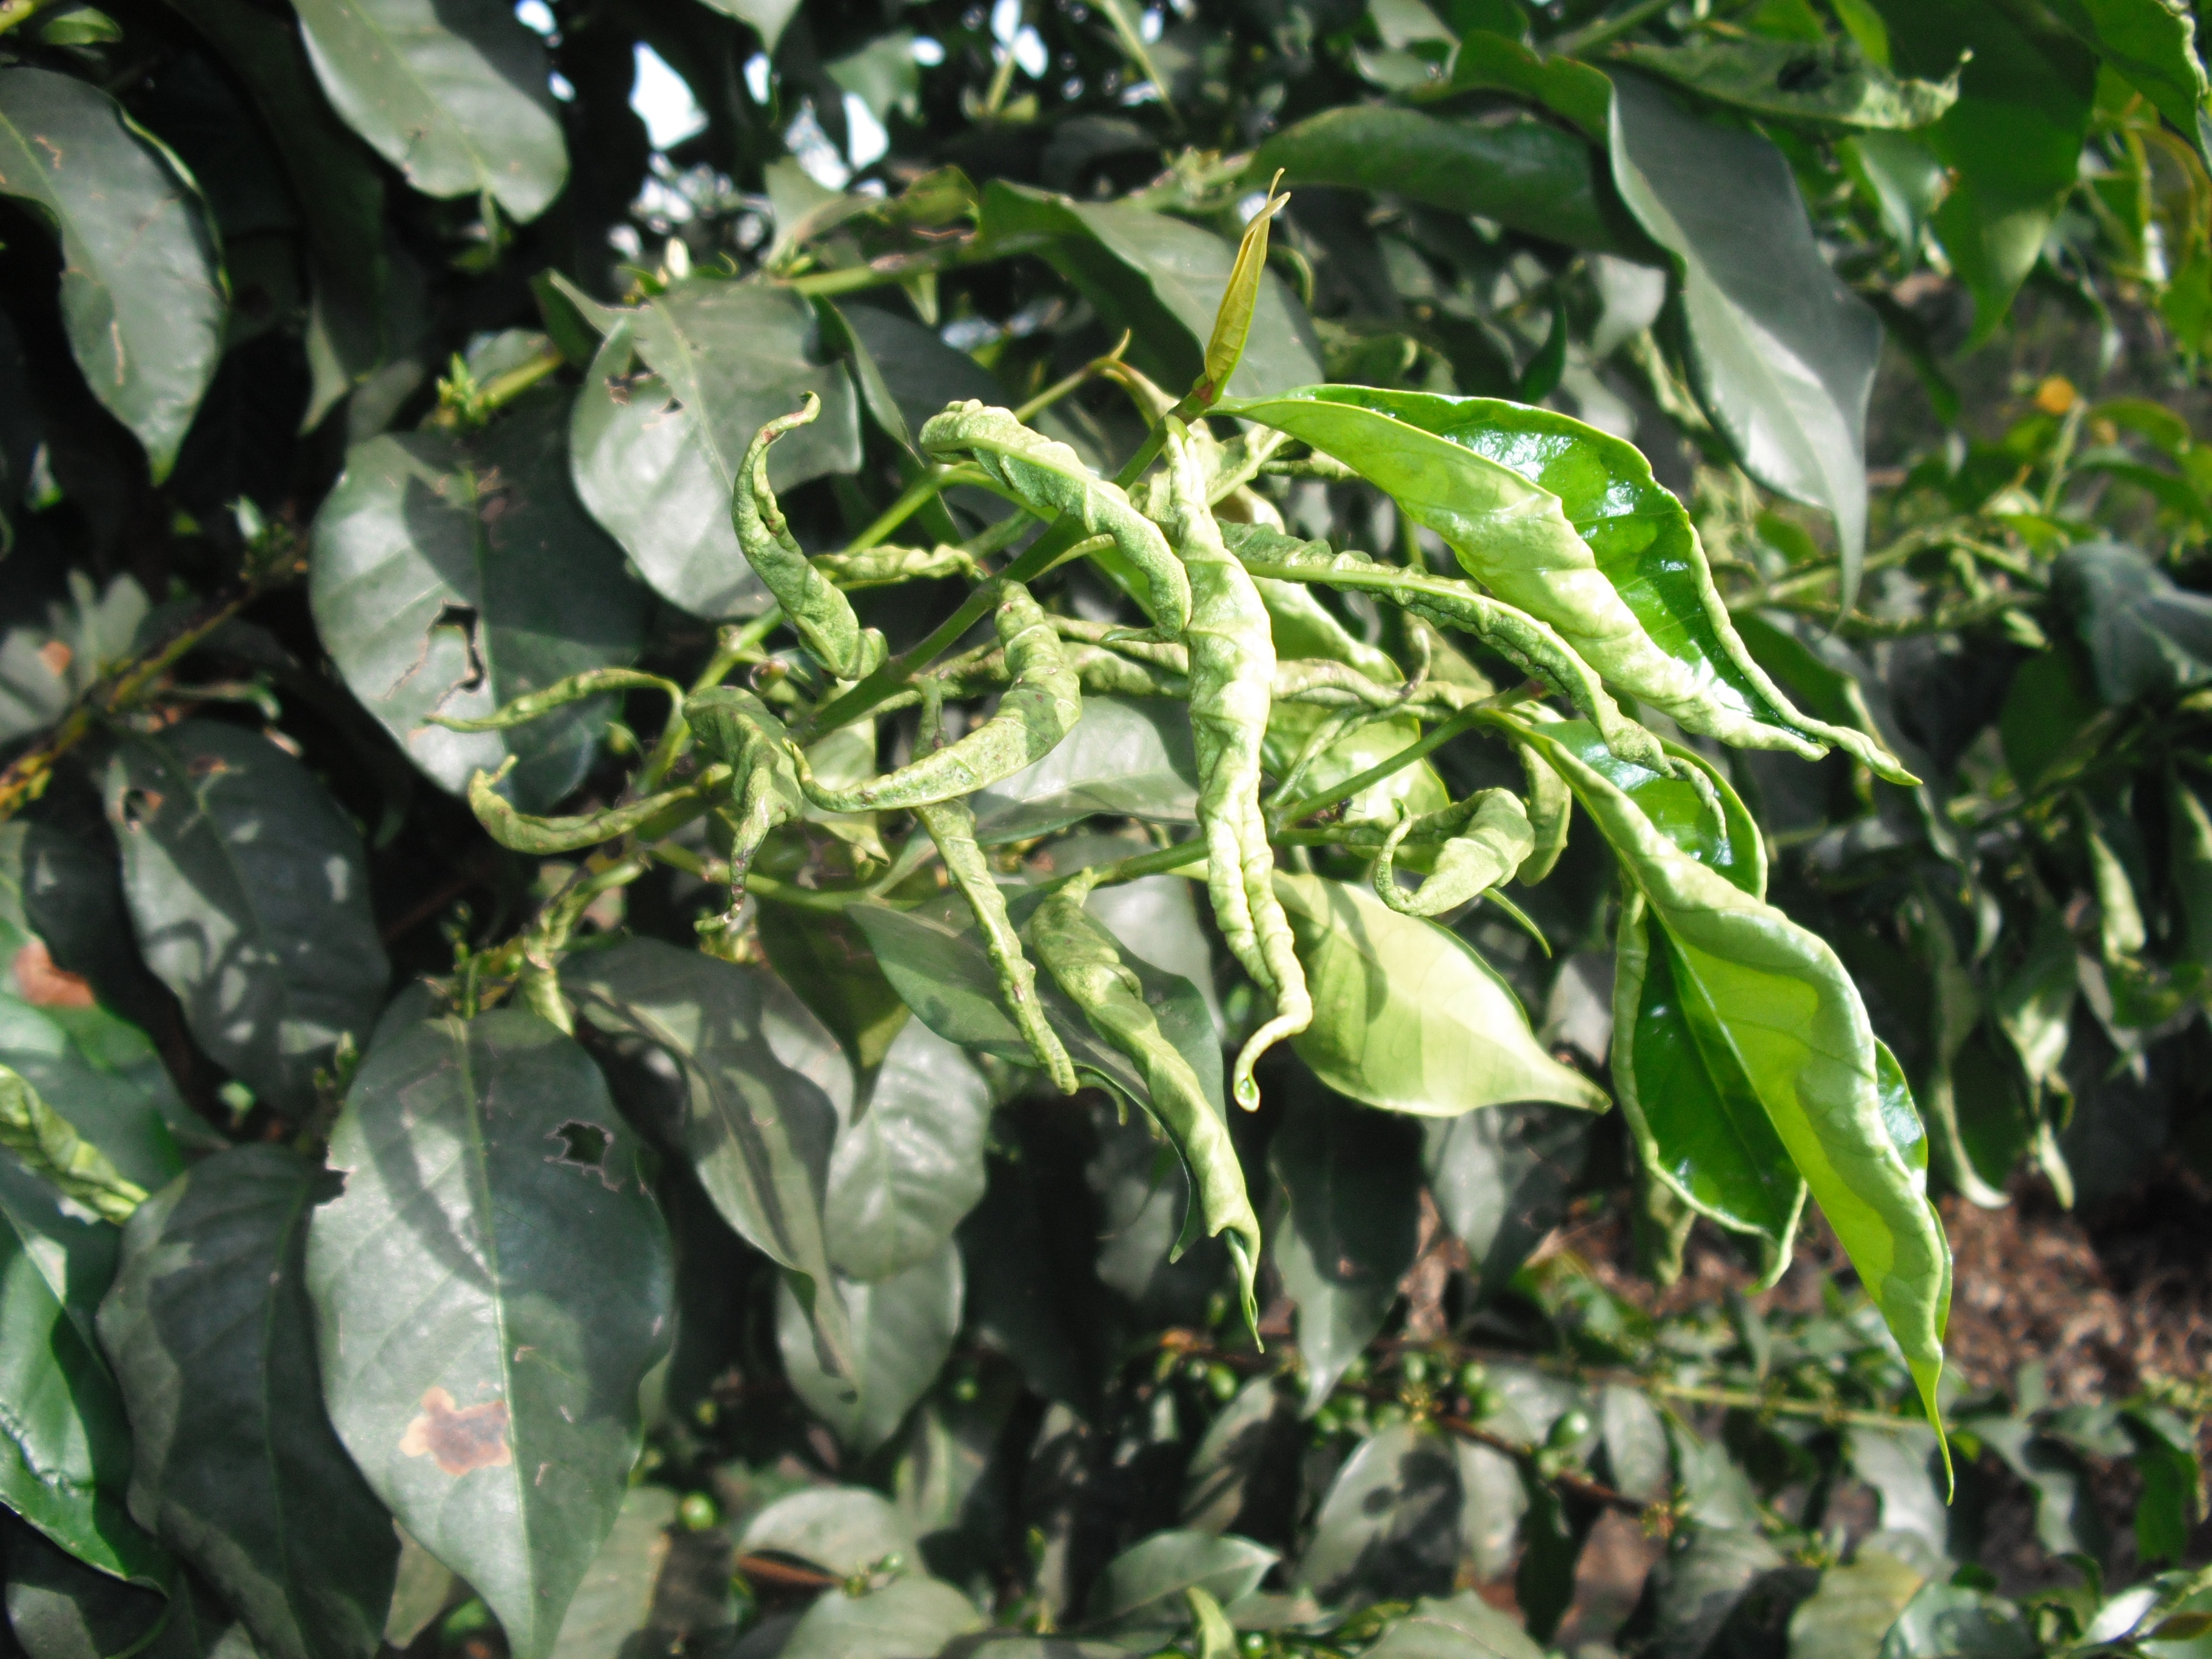 File:Leaf curling in coffee caused by hoplandothrips.JPG - Wikimedia Commons